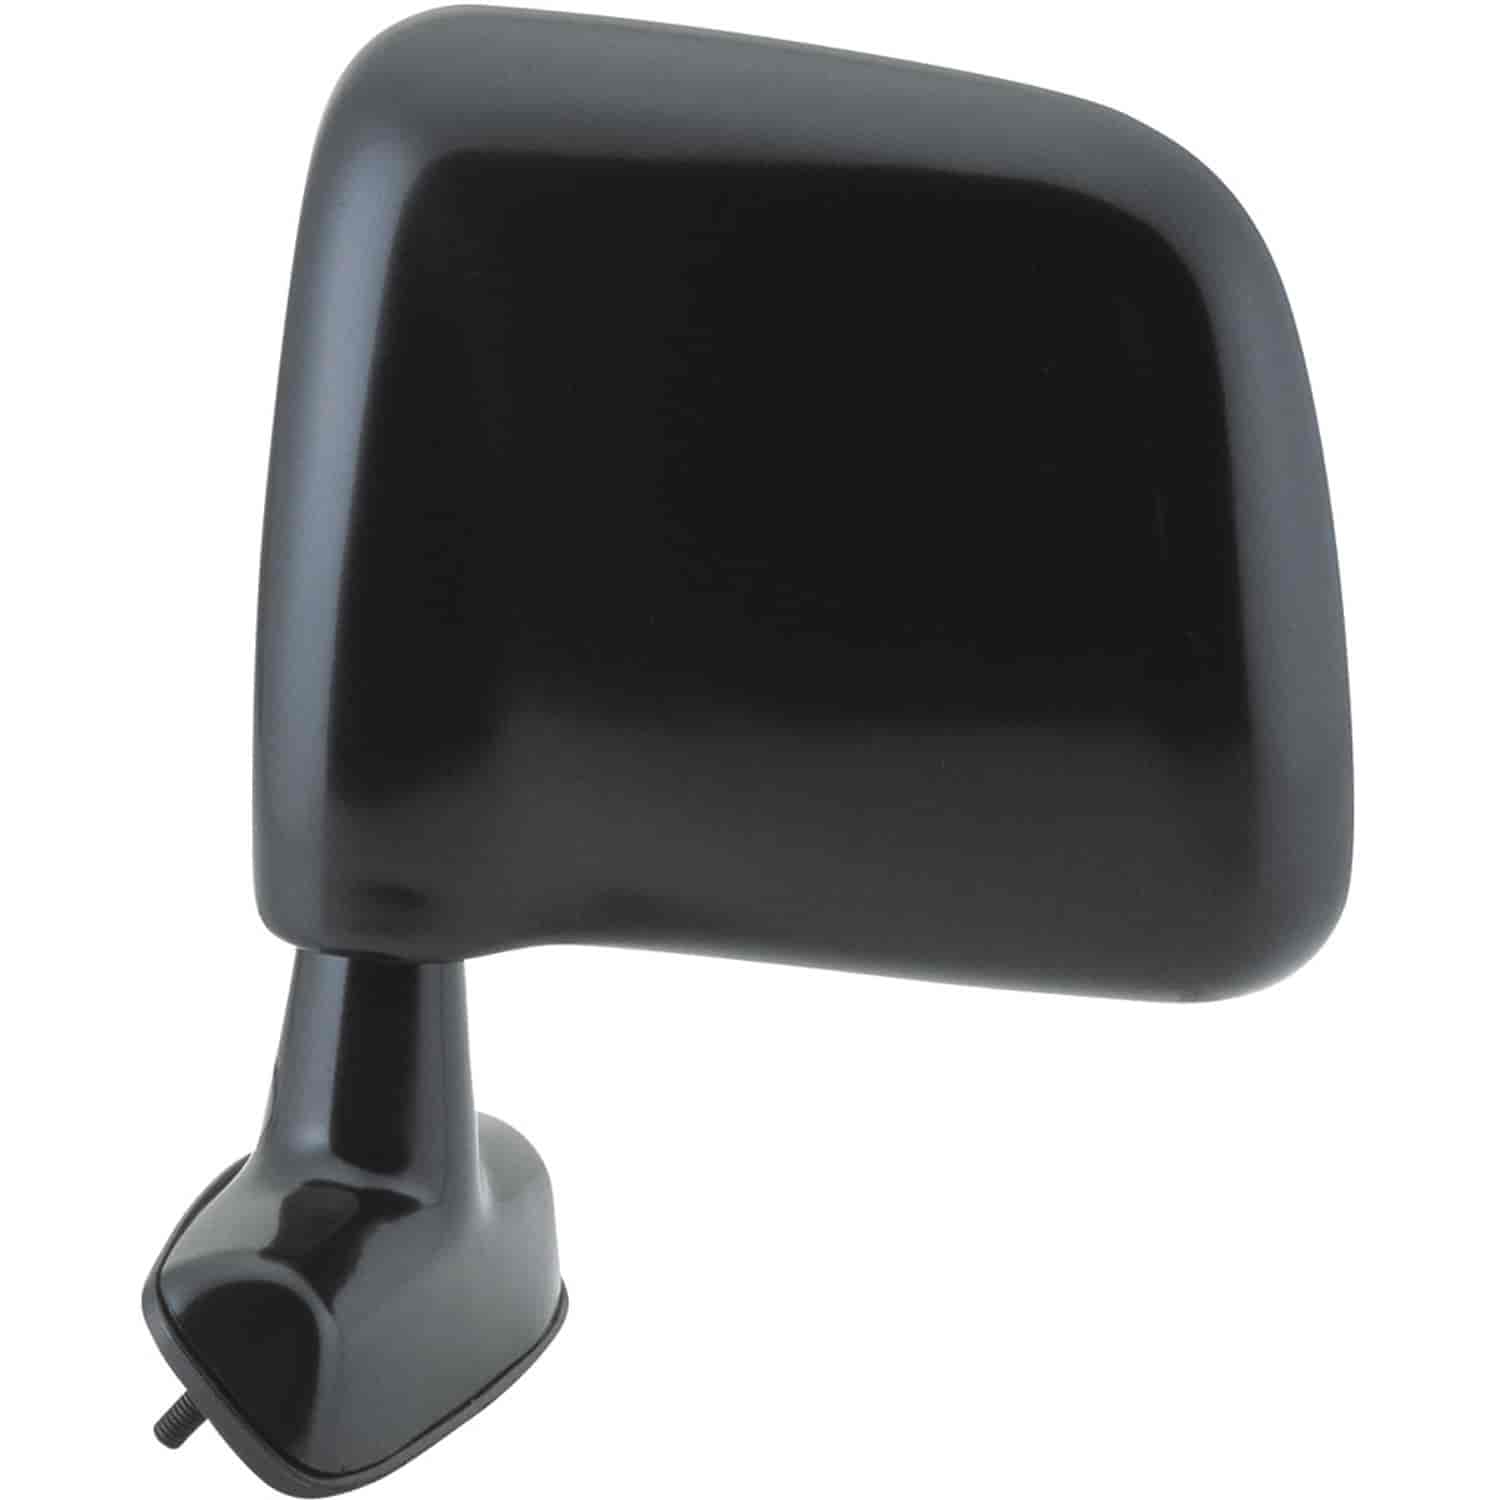 OEM Style Replacement mirror for 86-97 Ford Aerostar driver side mirror tested to fit and function l